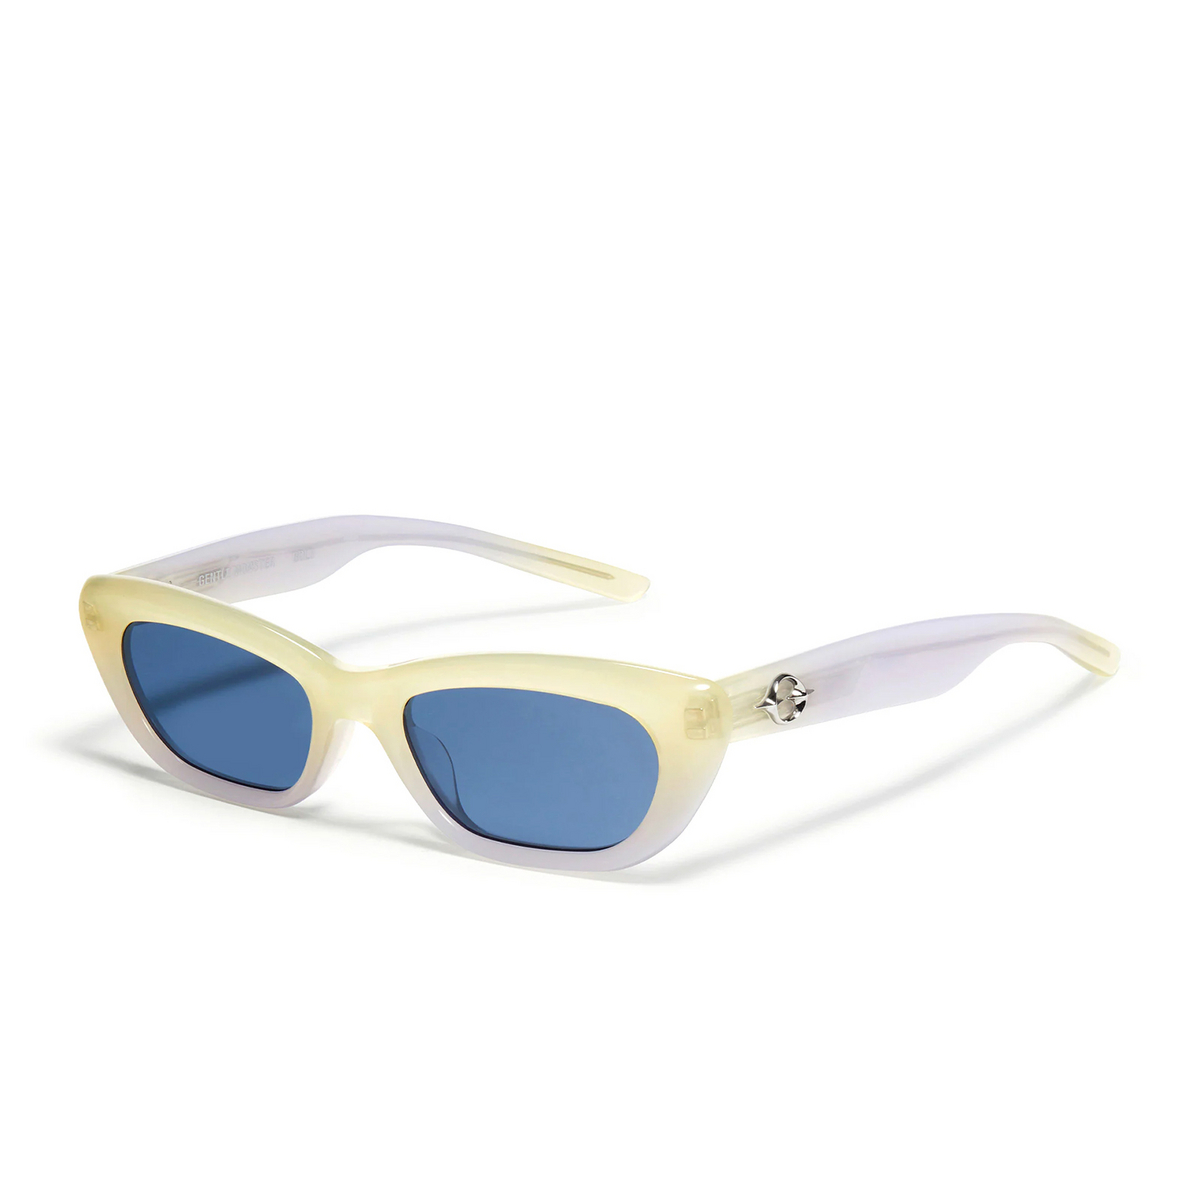 Gentle Monster 27AND 7 Sunglasses YVG1 Yellow & Violet - three-quarters view